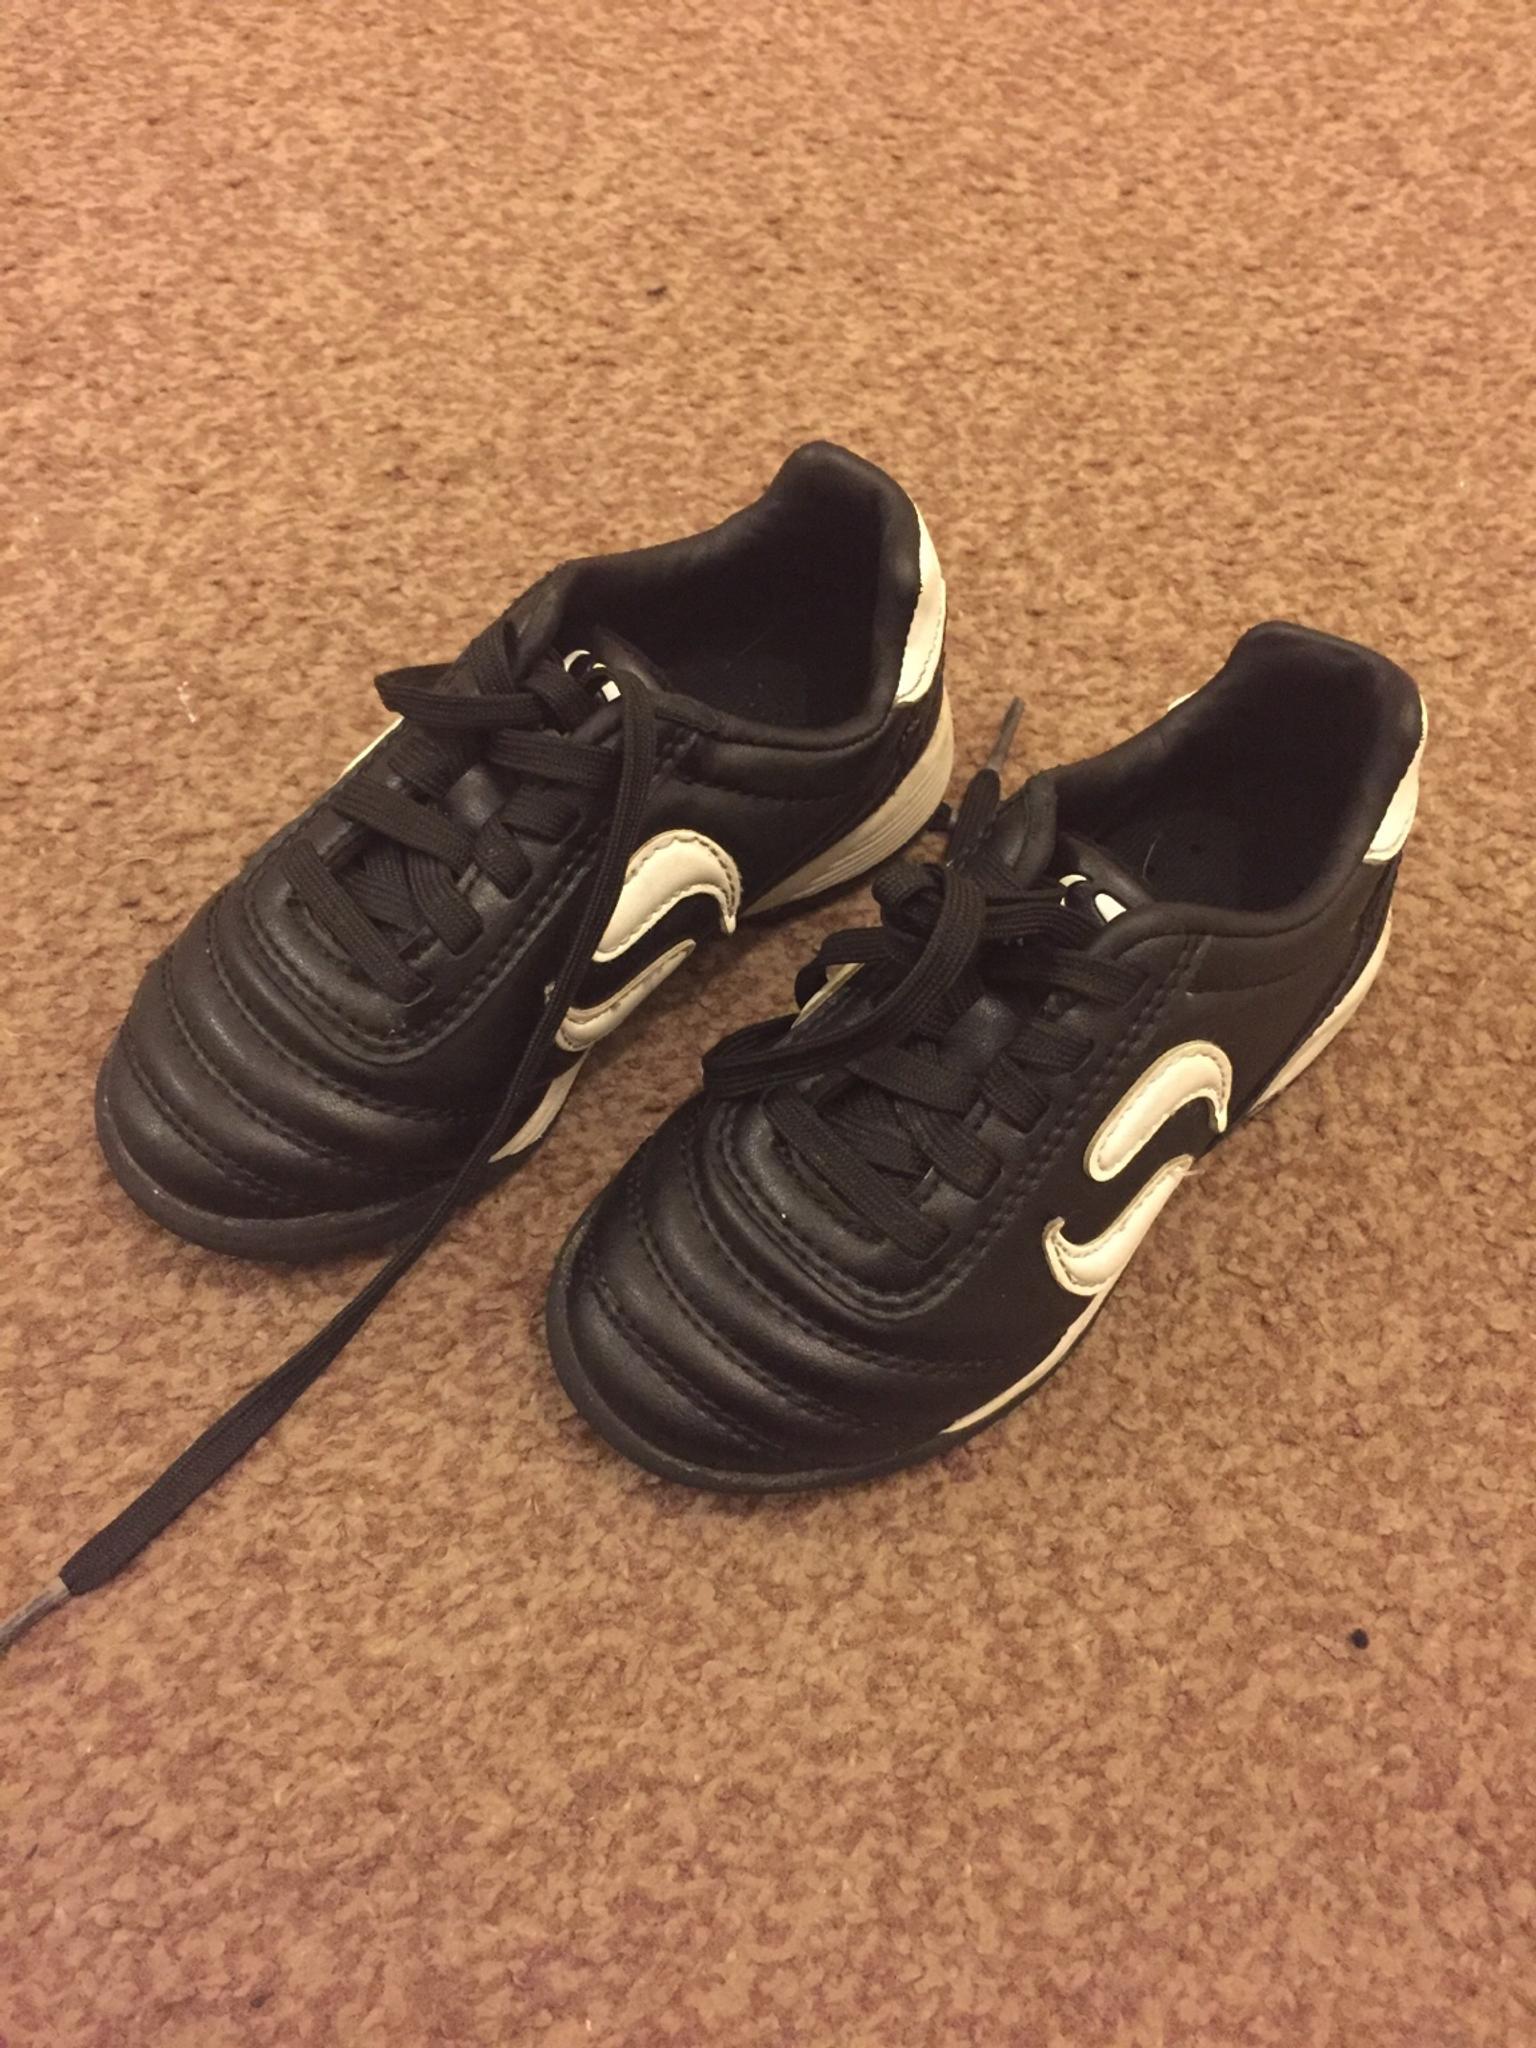 infant football trainers size 8